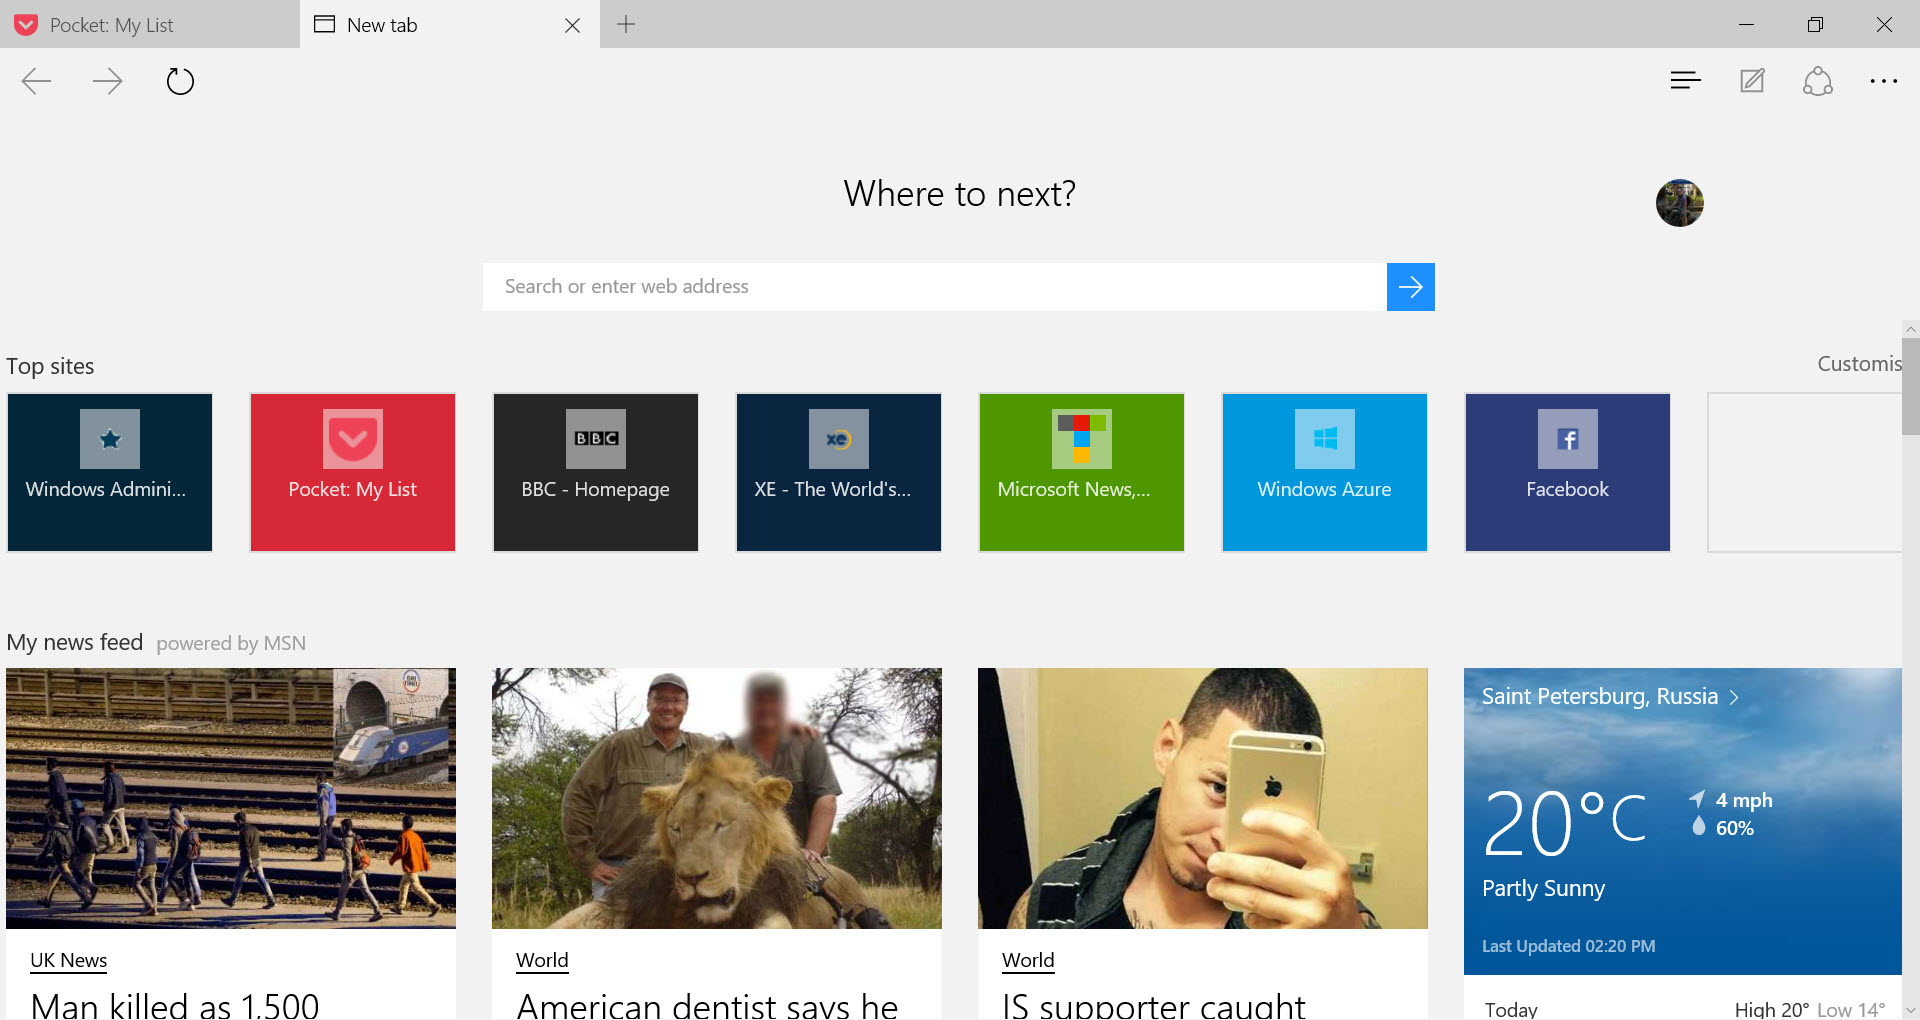 Browsing the web in Microsoft Edge on Windows 10 (Image Credit: Russell Smith)